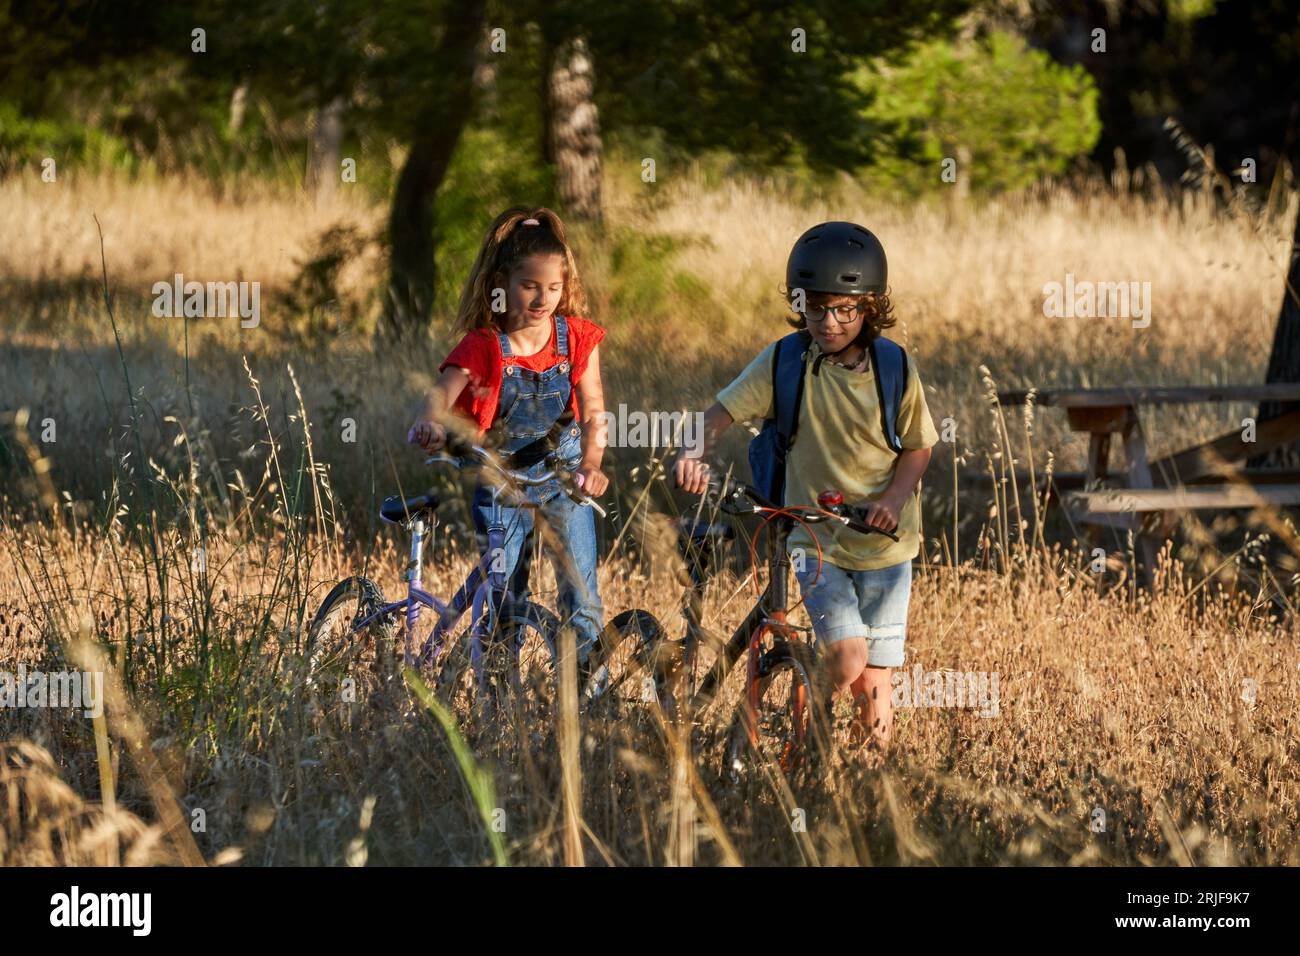 Full length of girl and boy in protective helmet bonding while walking through dry grass with bikes near wooden picnic table placed in recreation area Stock Photo